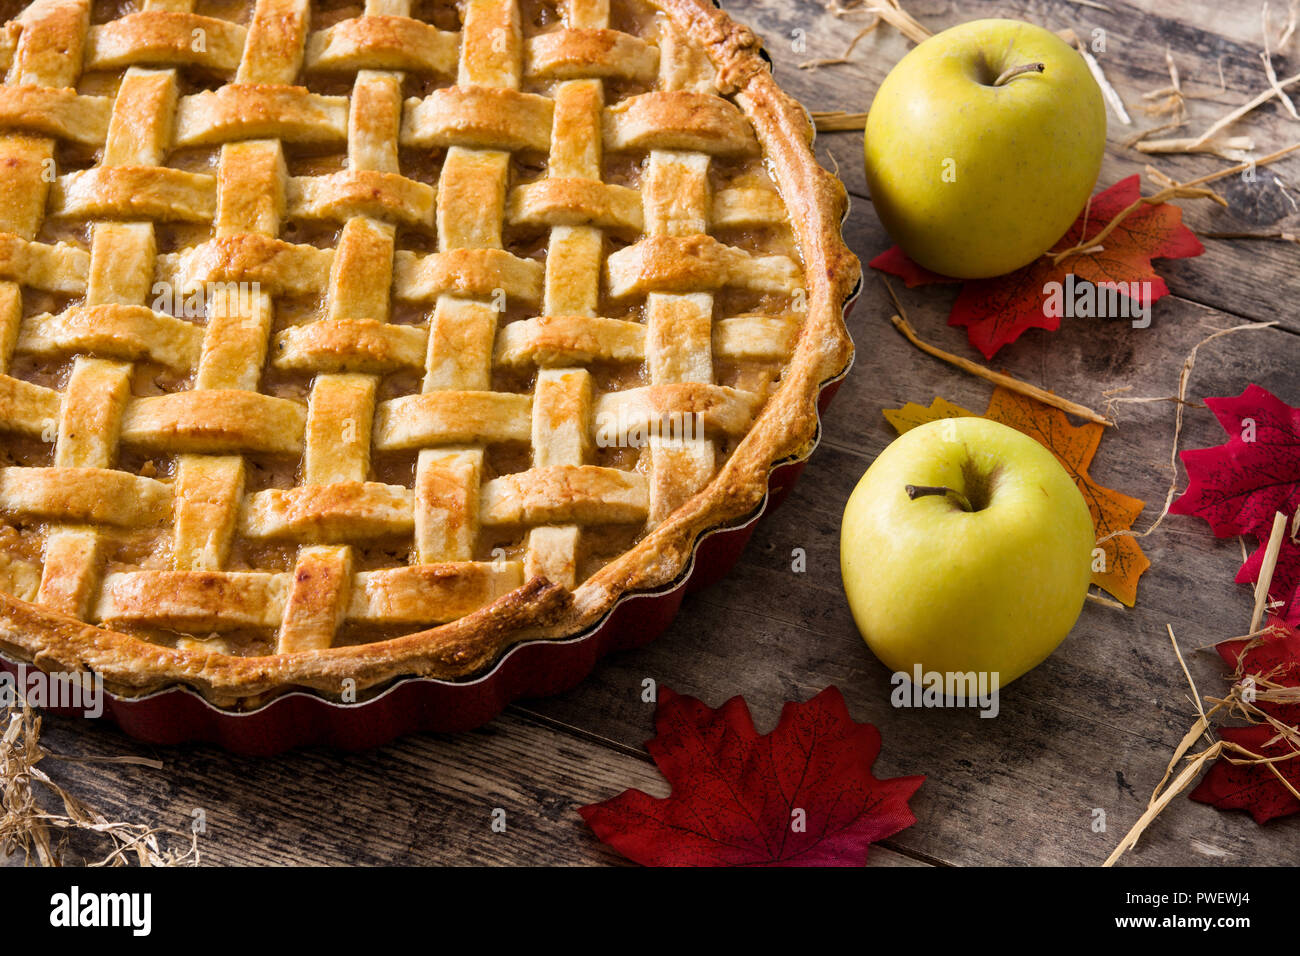 Homemade apple pie on wooden table Stock Photo